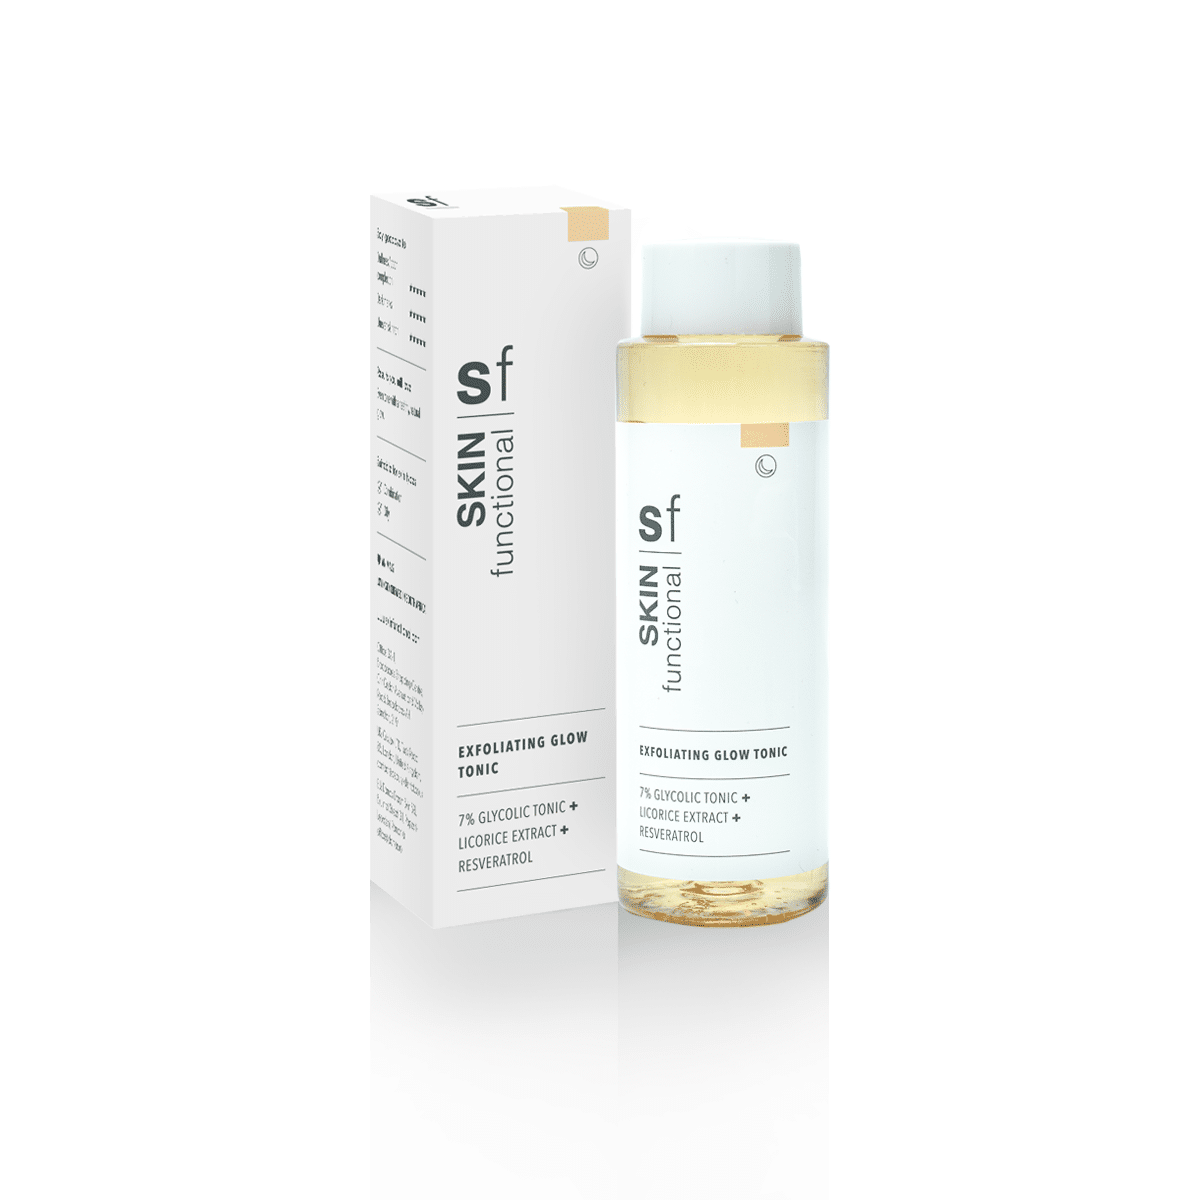 A bottle of Skin Functional - 7% Glycolic Acid + Licorice Extract + Resveratrol on a white background.